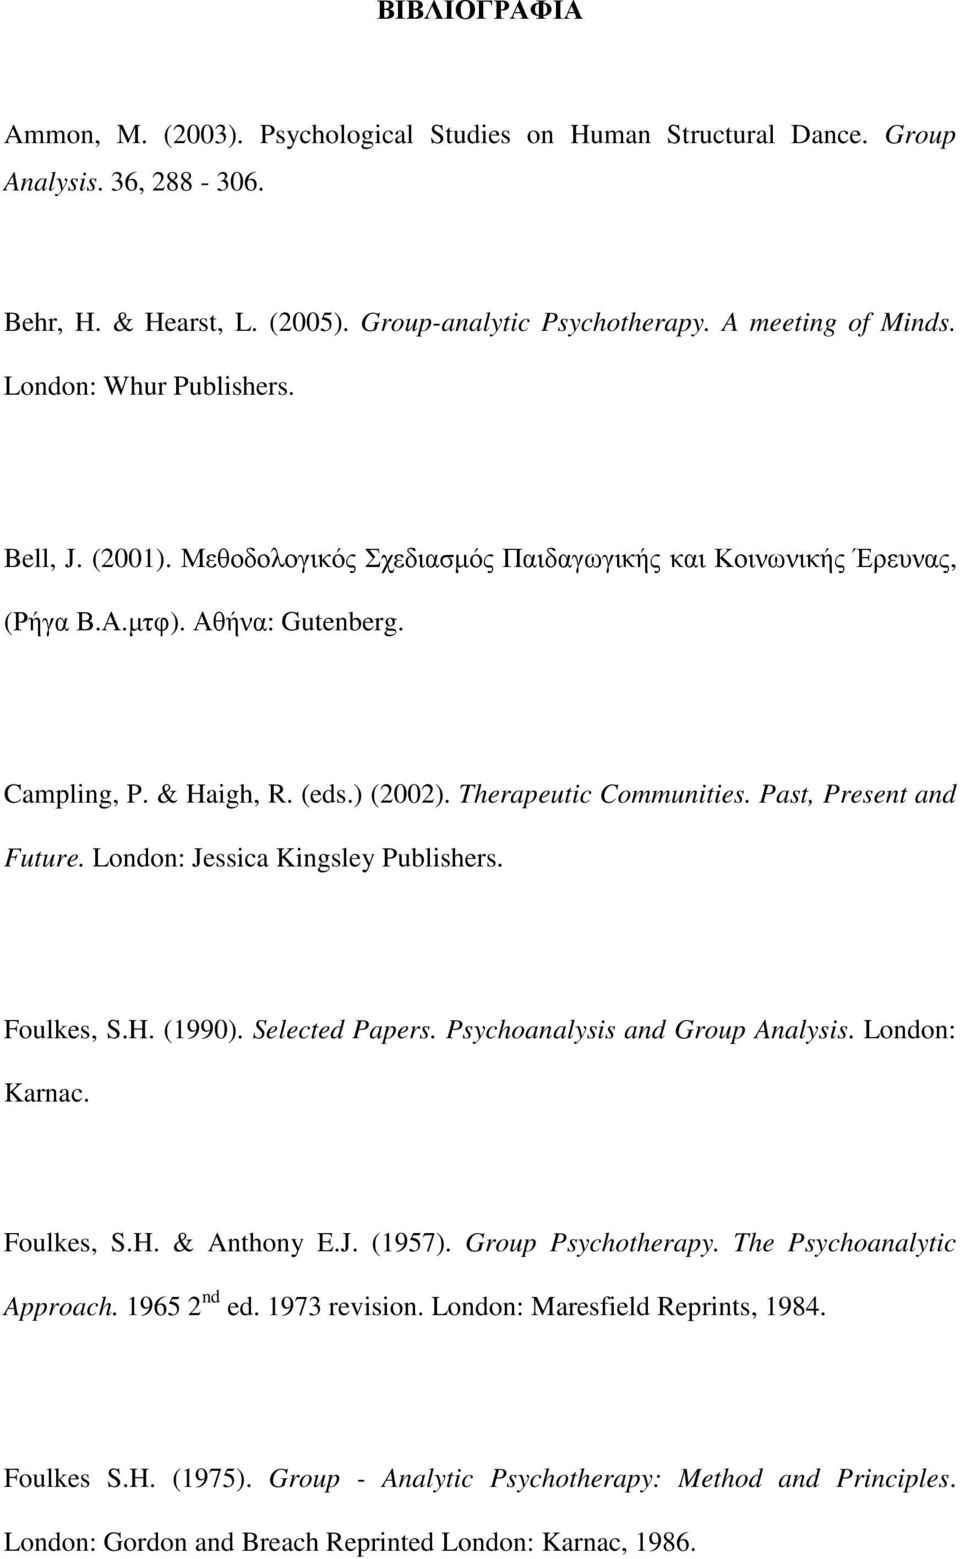 Therapeutic Communities. Past, Present and Future. London: Jessica Kingsley Publishers. Foulkes, S.H. (1990). Selected Papers. Psychoanalysis and Group Analysis. London: Karnac. Foulkes, S.H. & Anthony E.